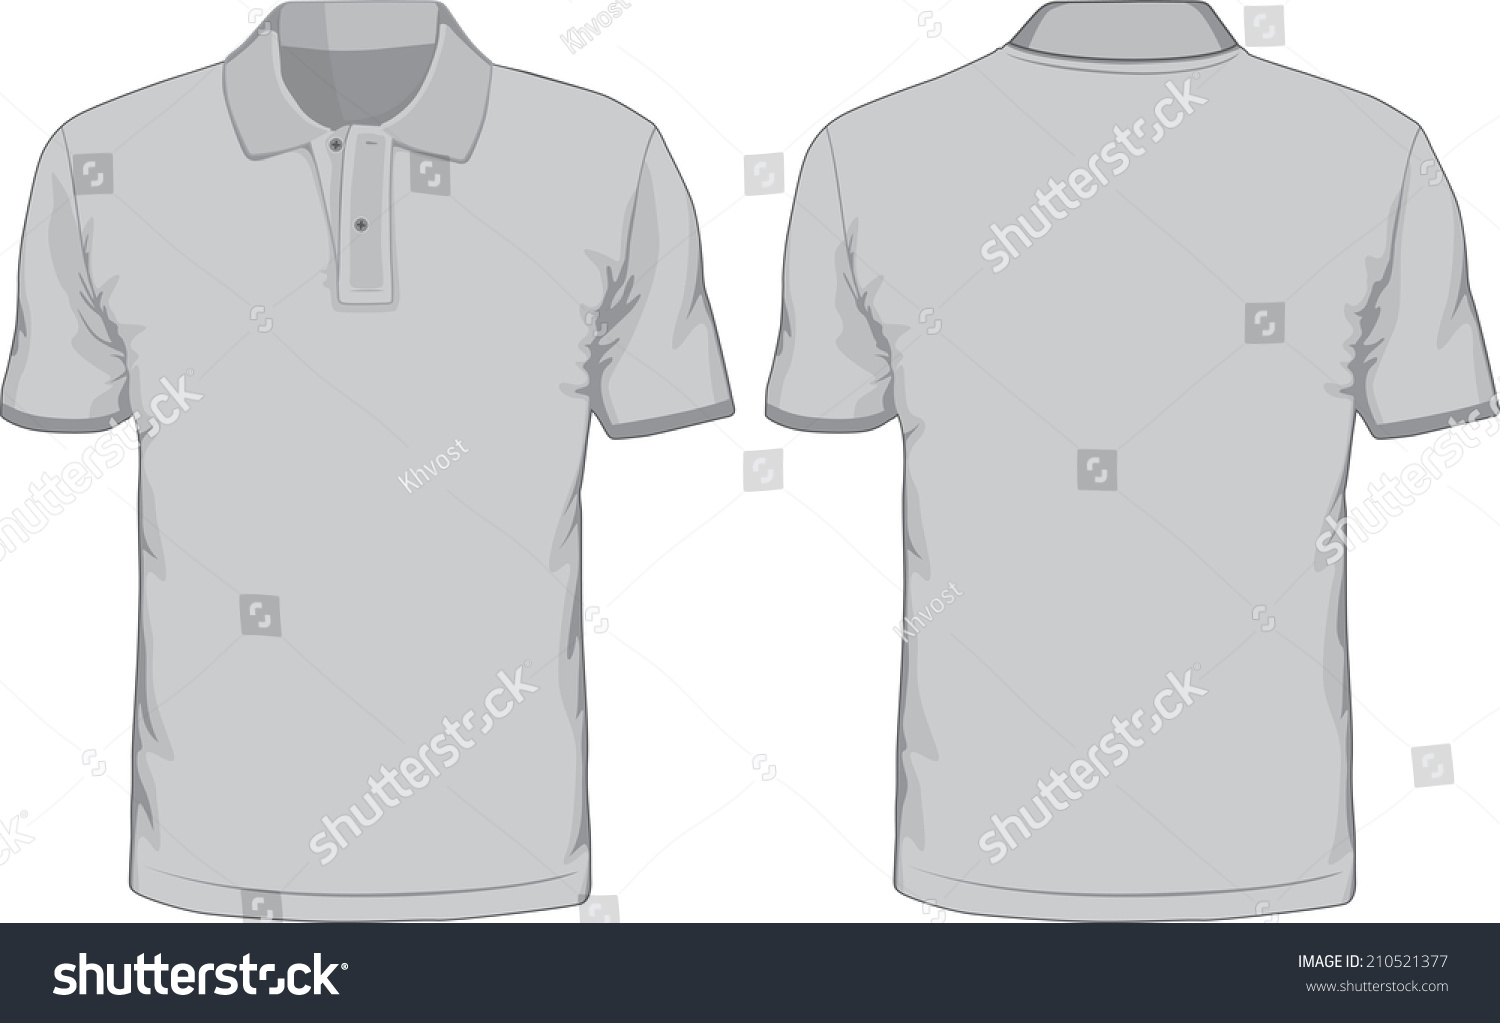 Mens Poloshirts Template Front Back Views Stock Illustration 210521377 ...